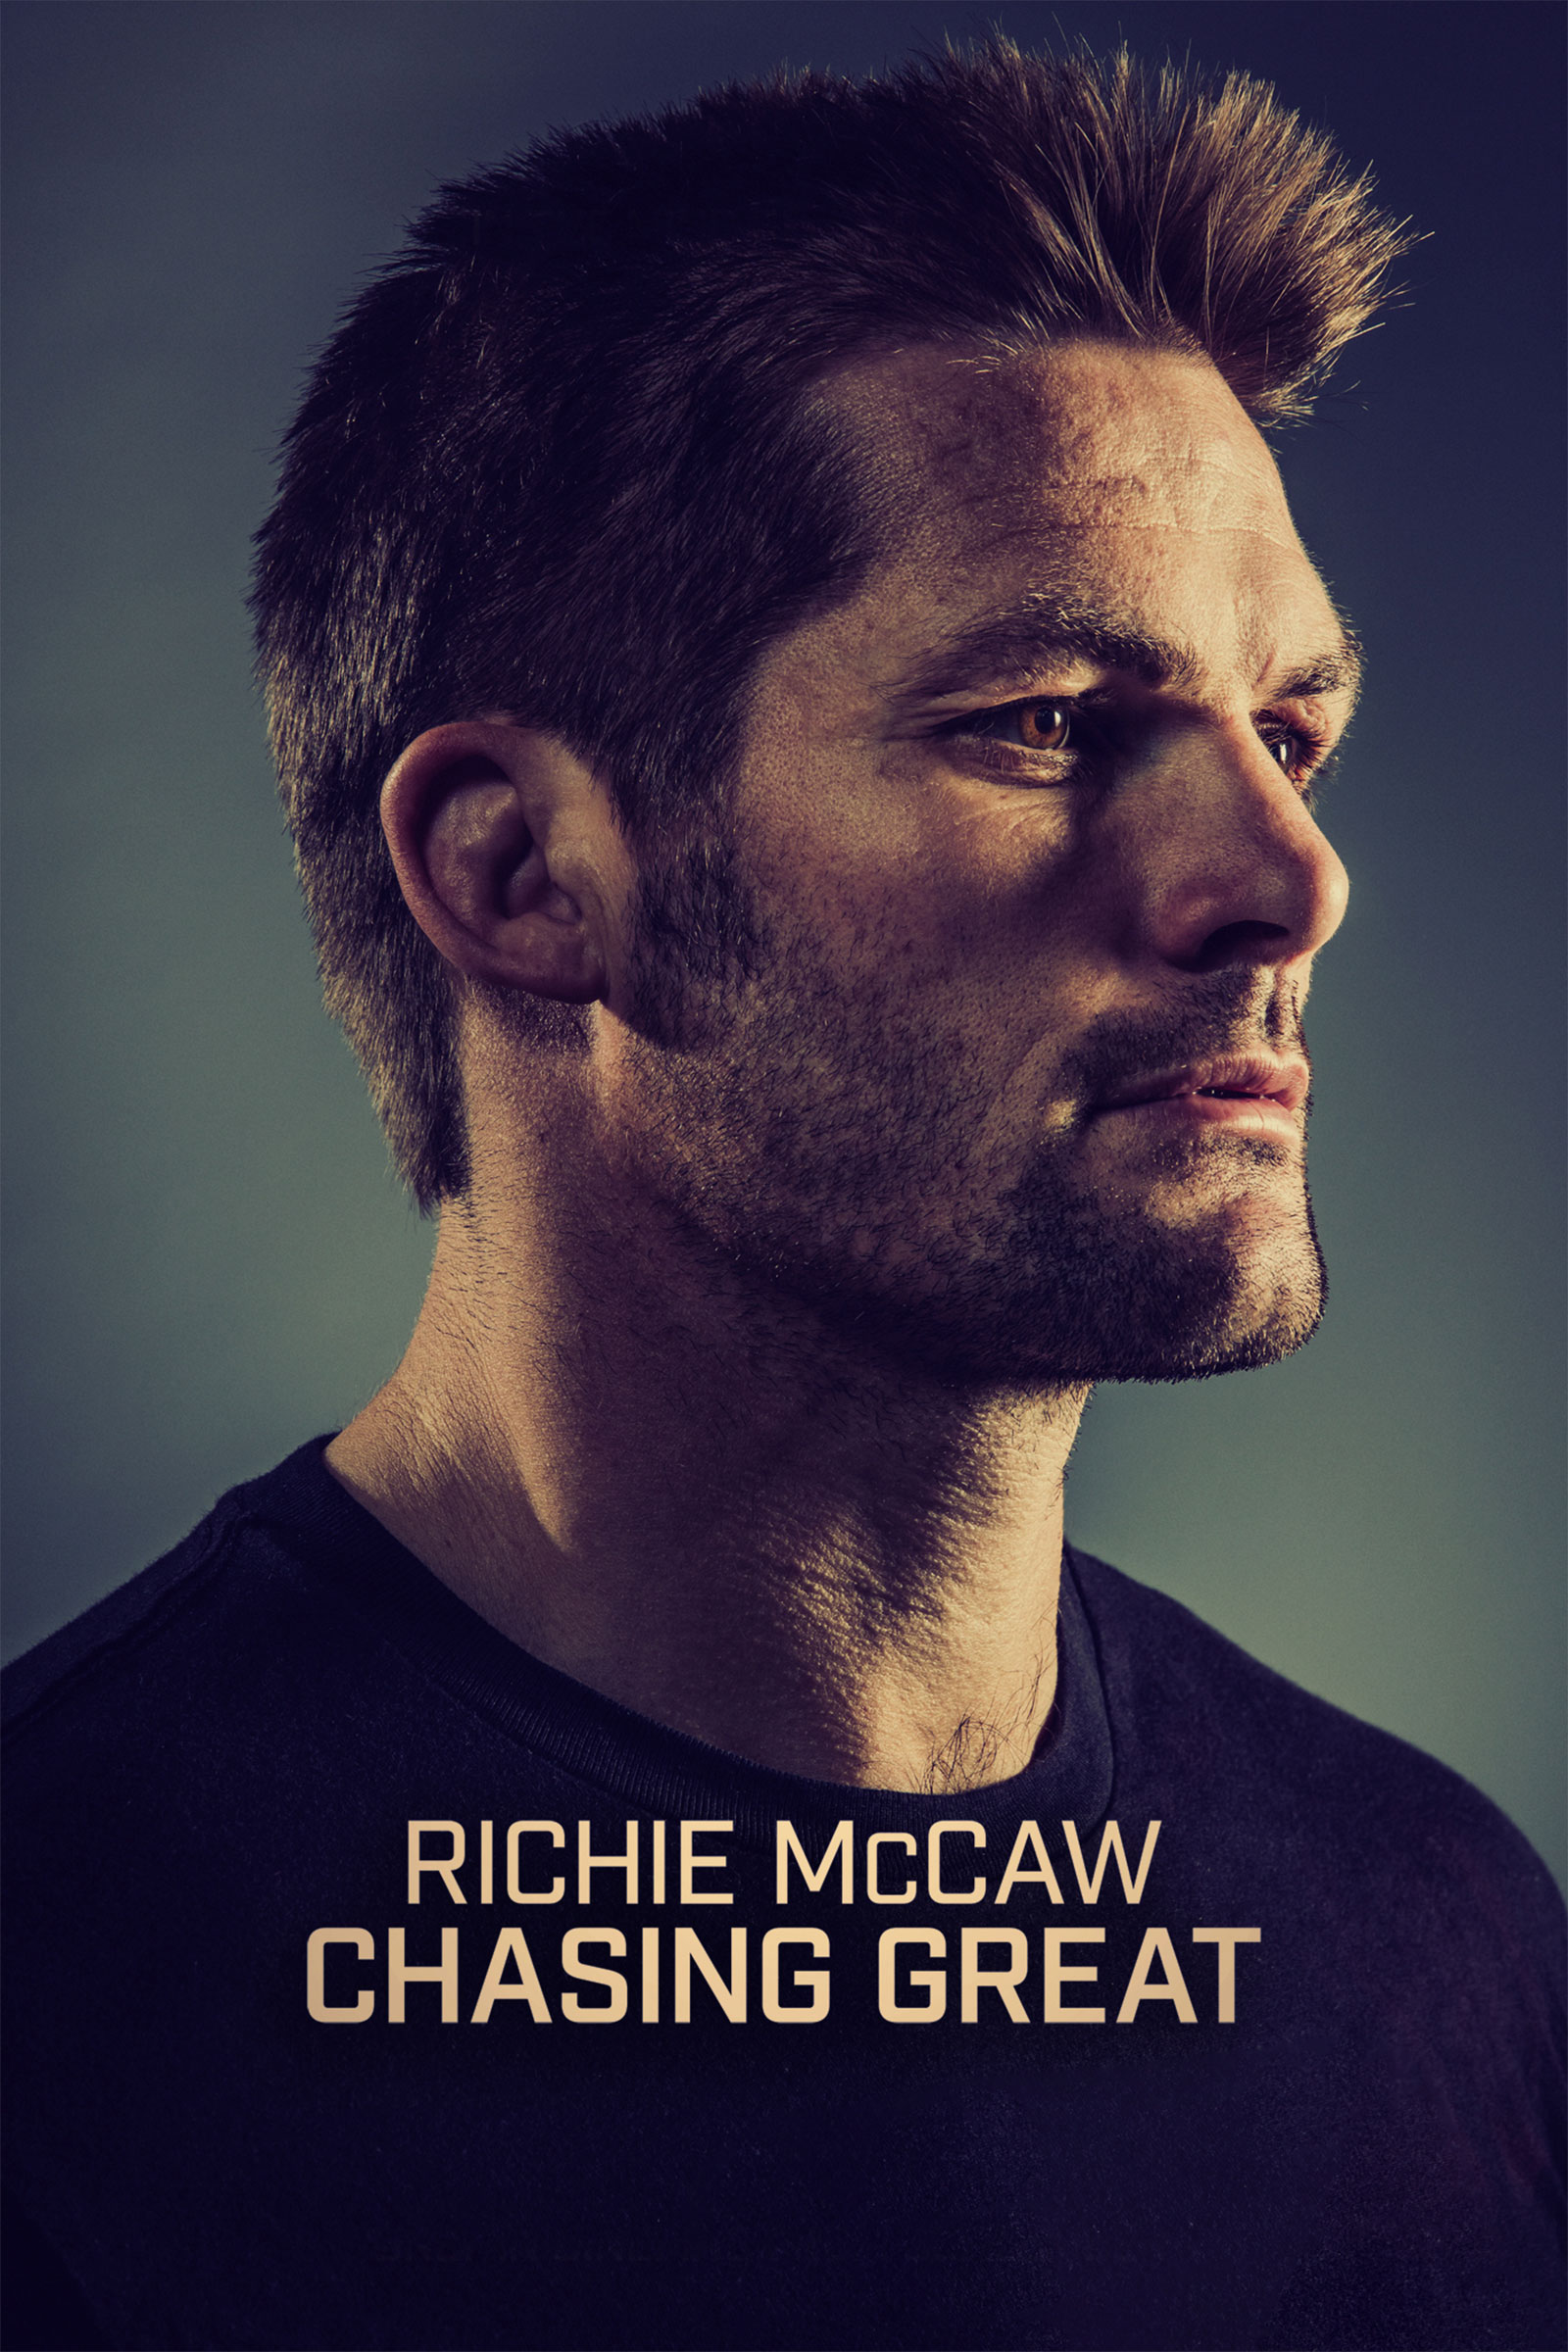 Where to stream Richie McCaw: Chasing Great